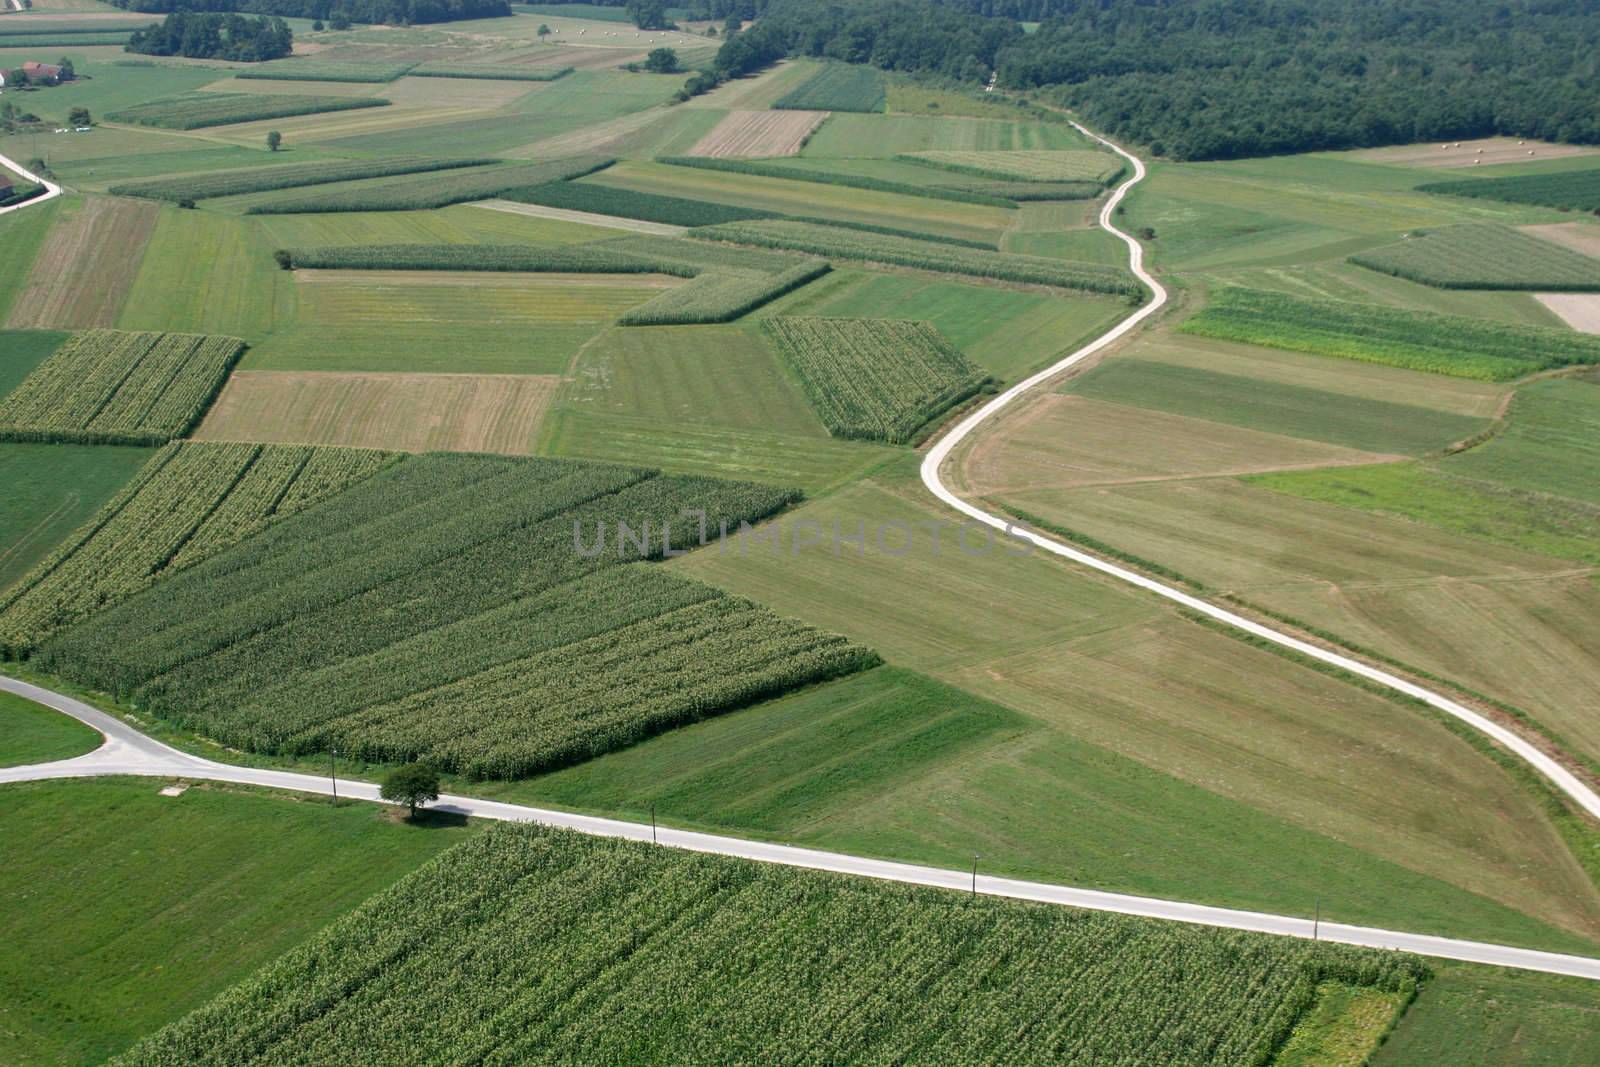 Meadows and fields. Aerial image